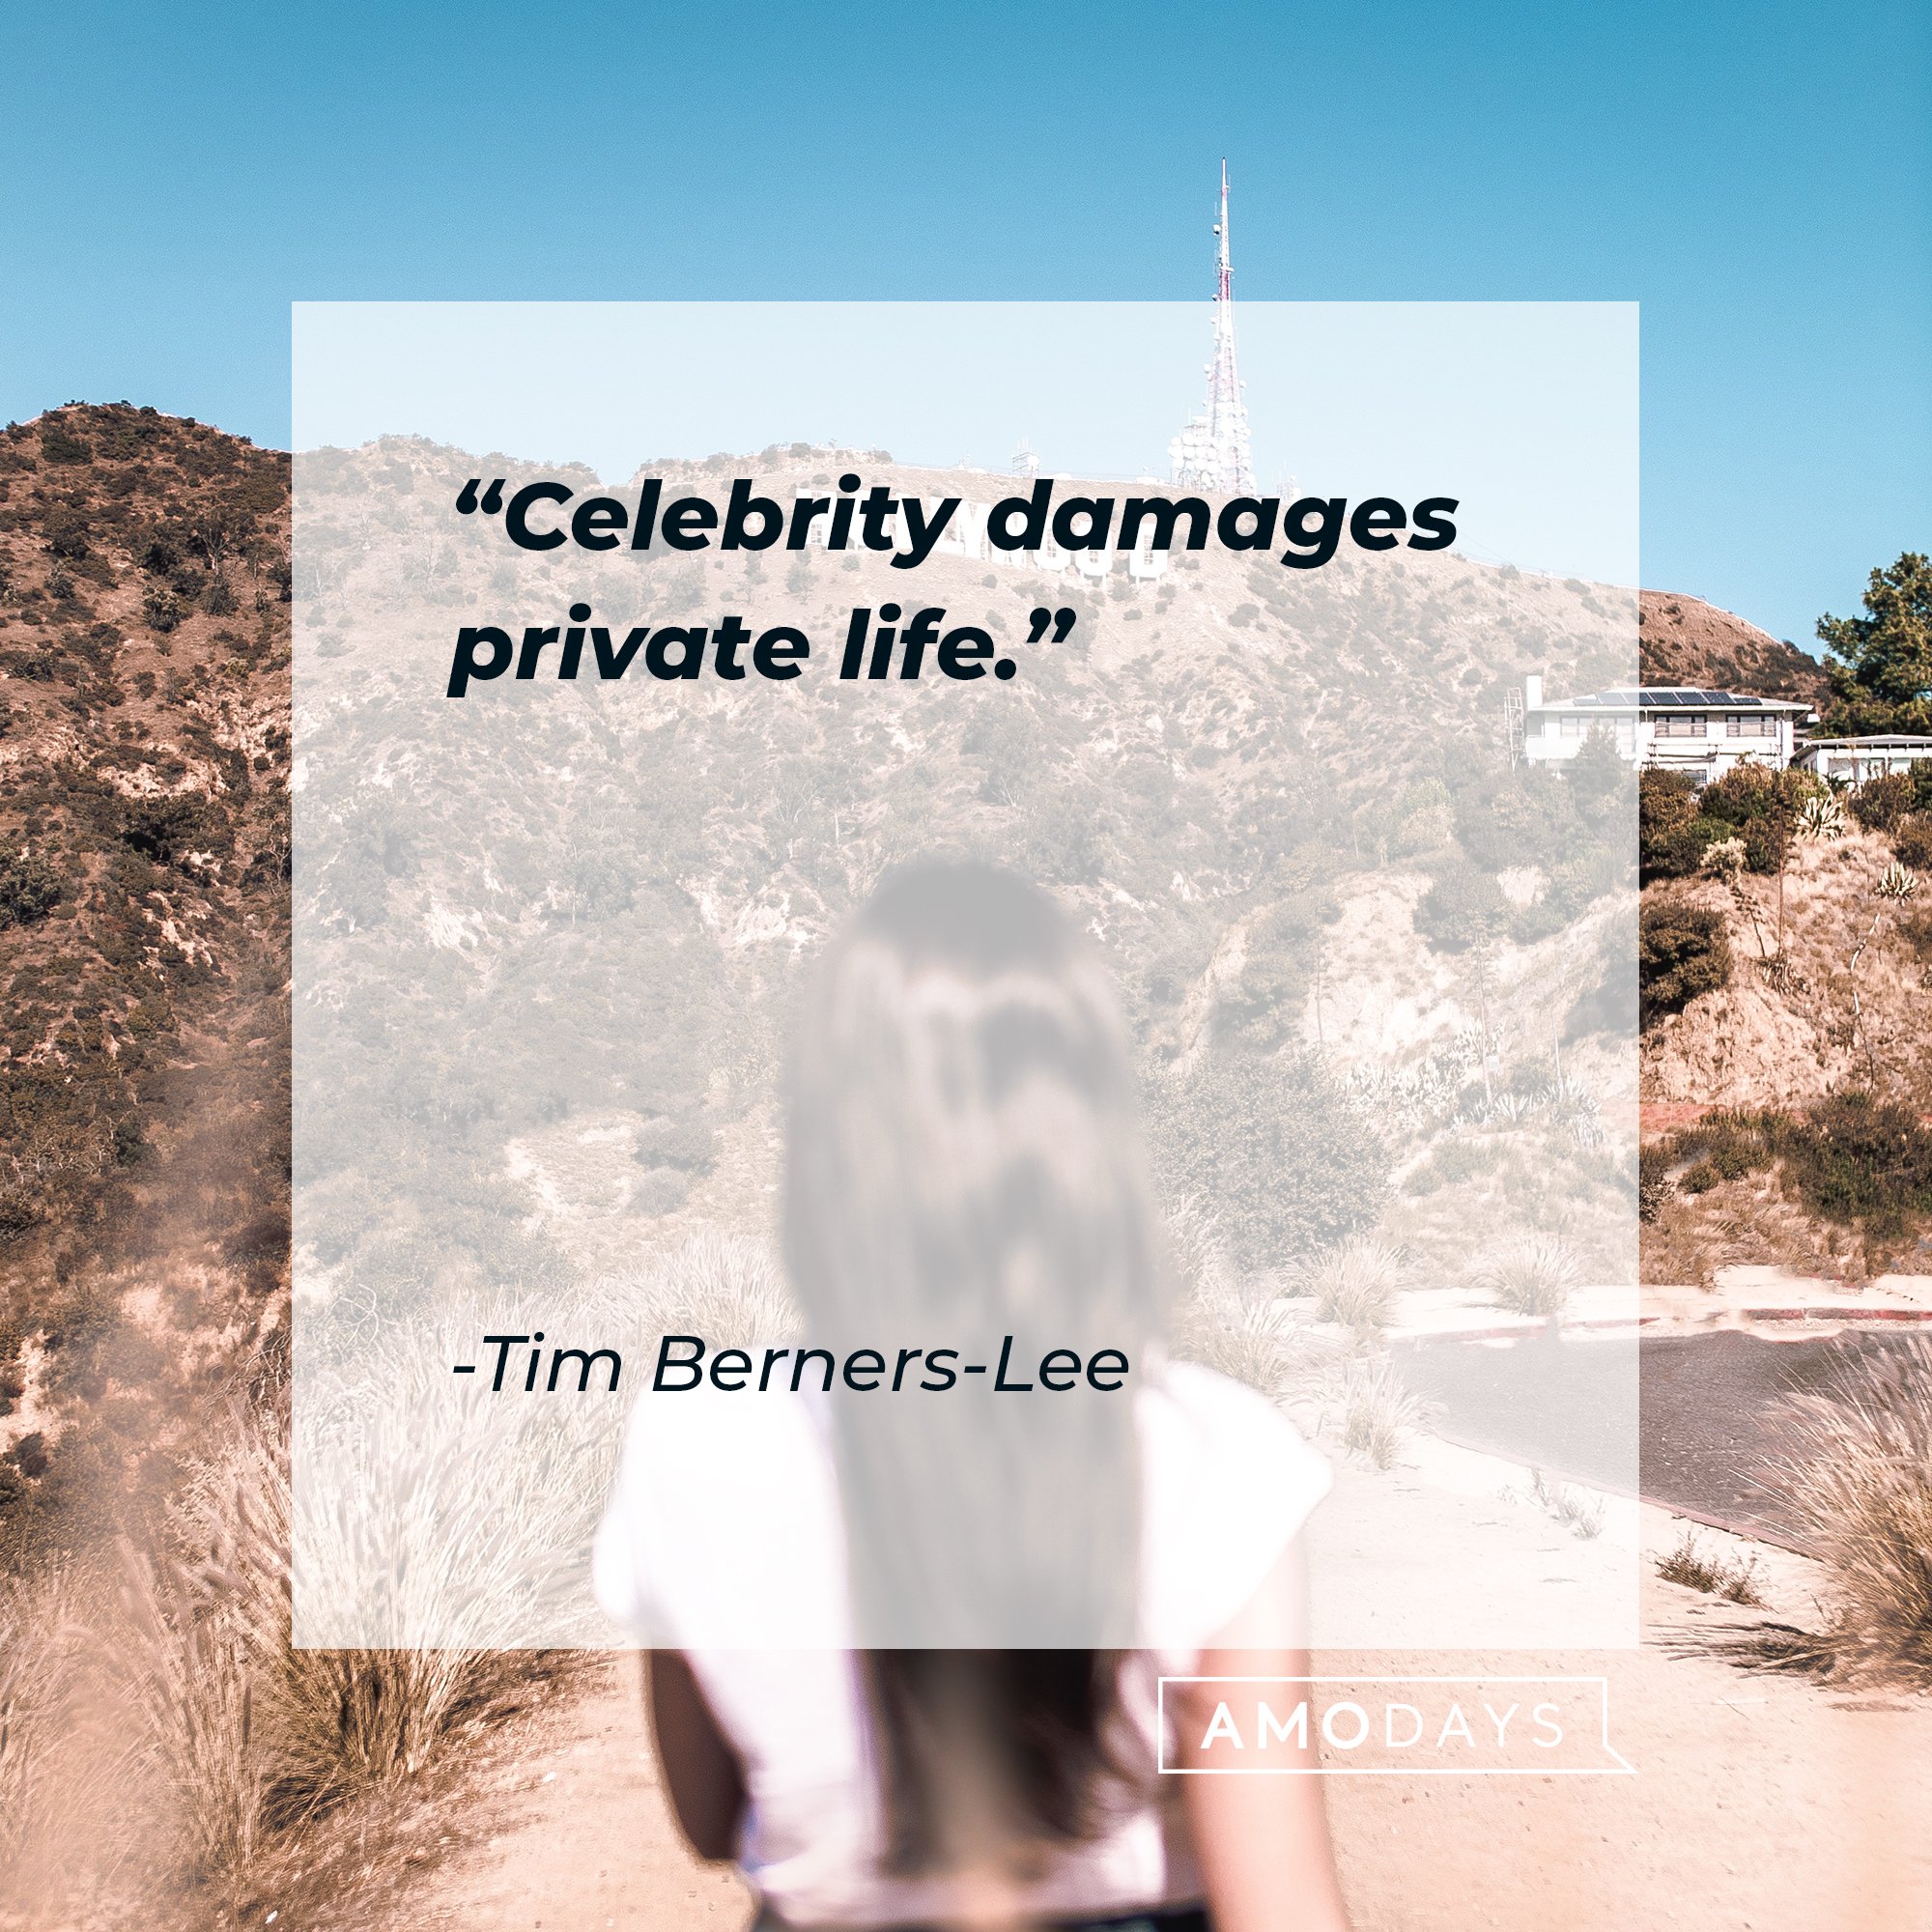 Tim Berners-Lee’s quote: "Celebrity damages private life." | Image: AmoDays  